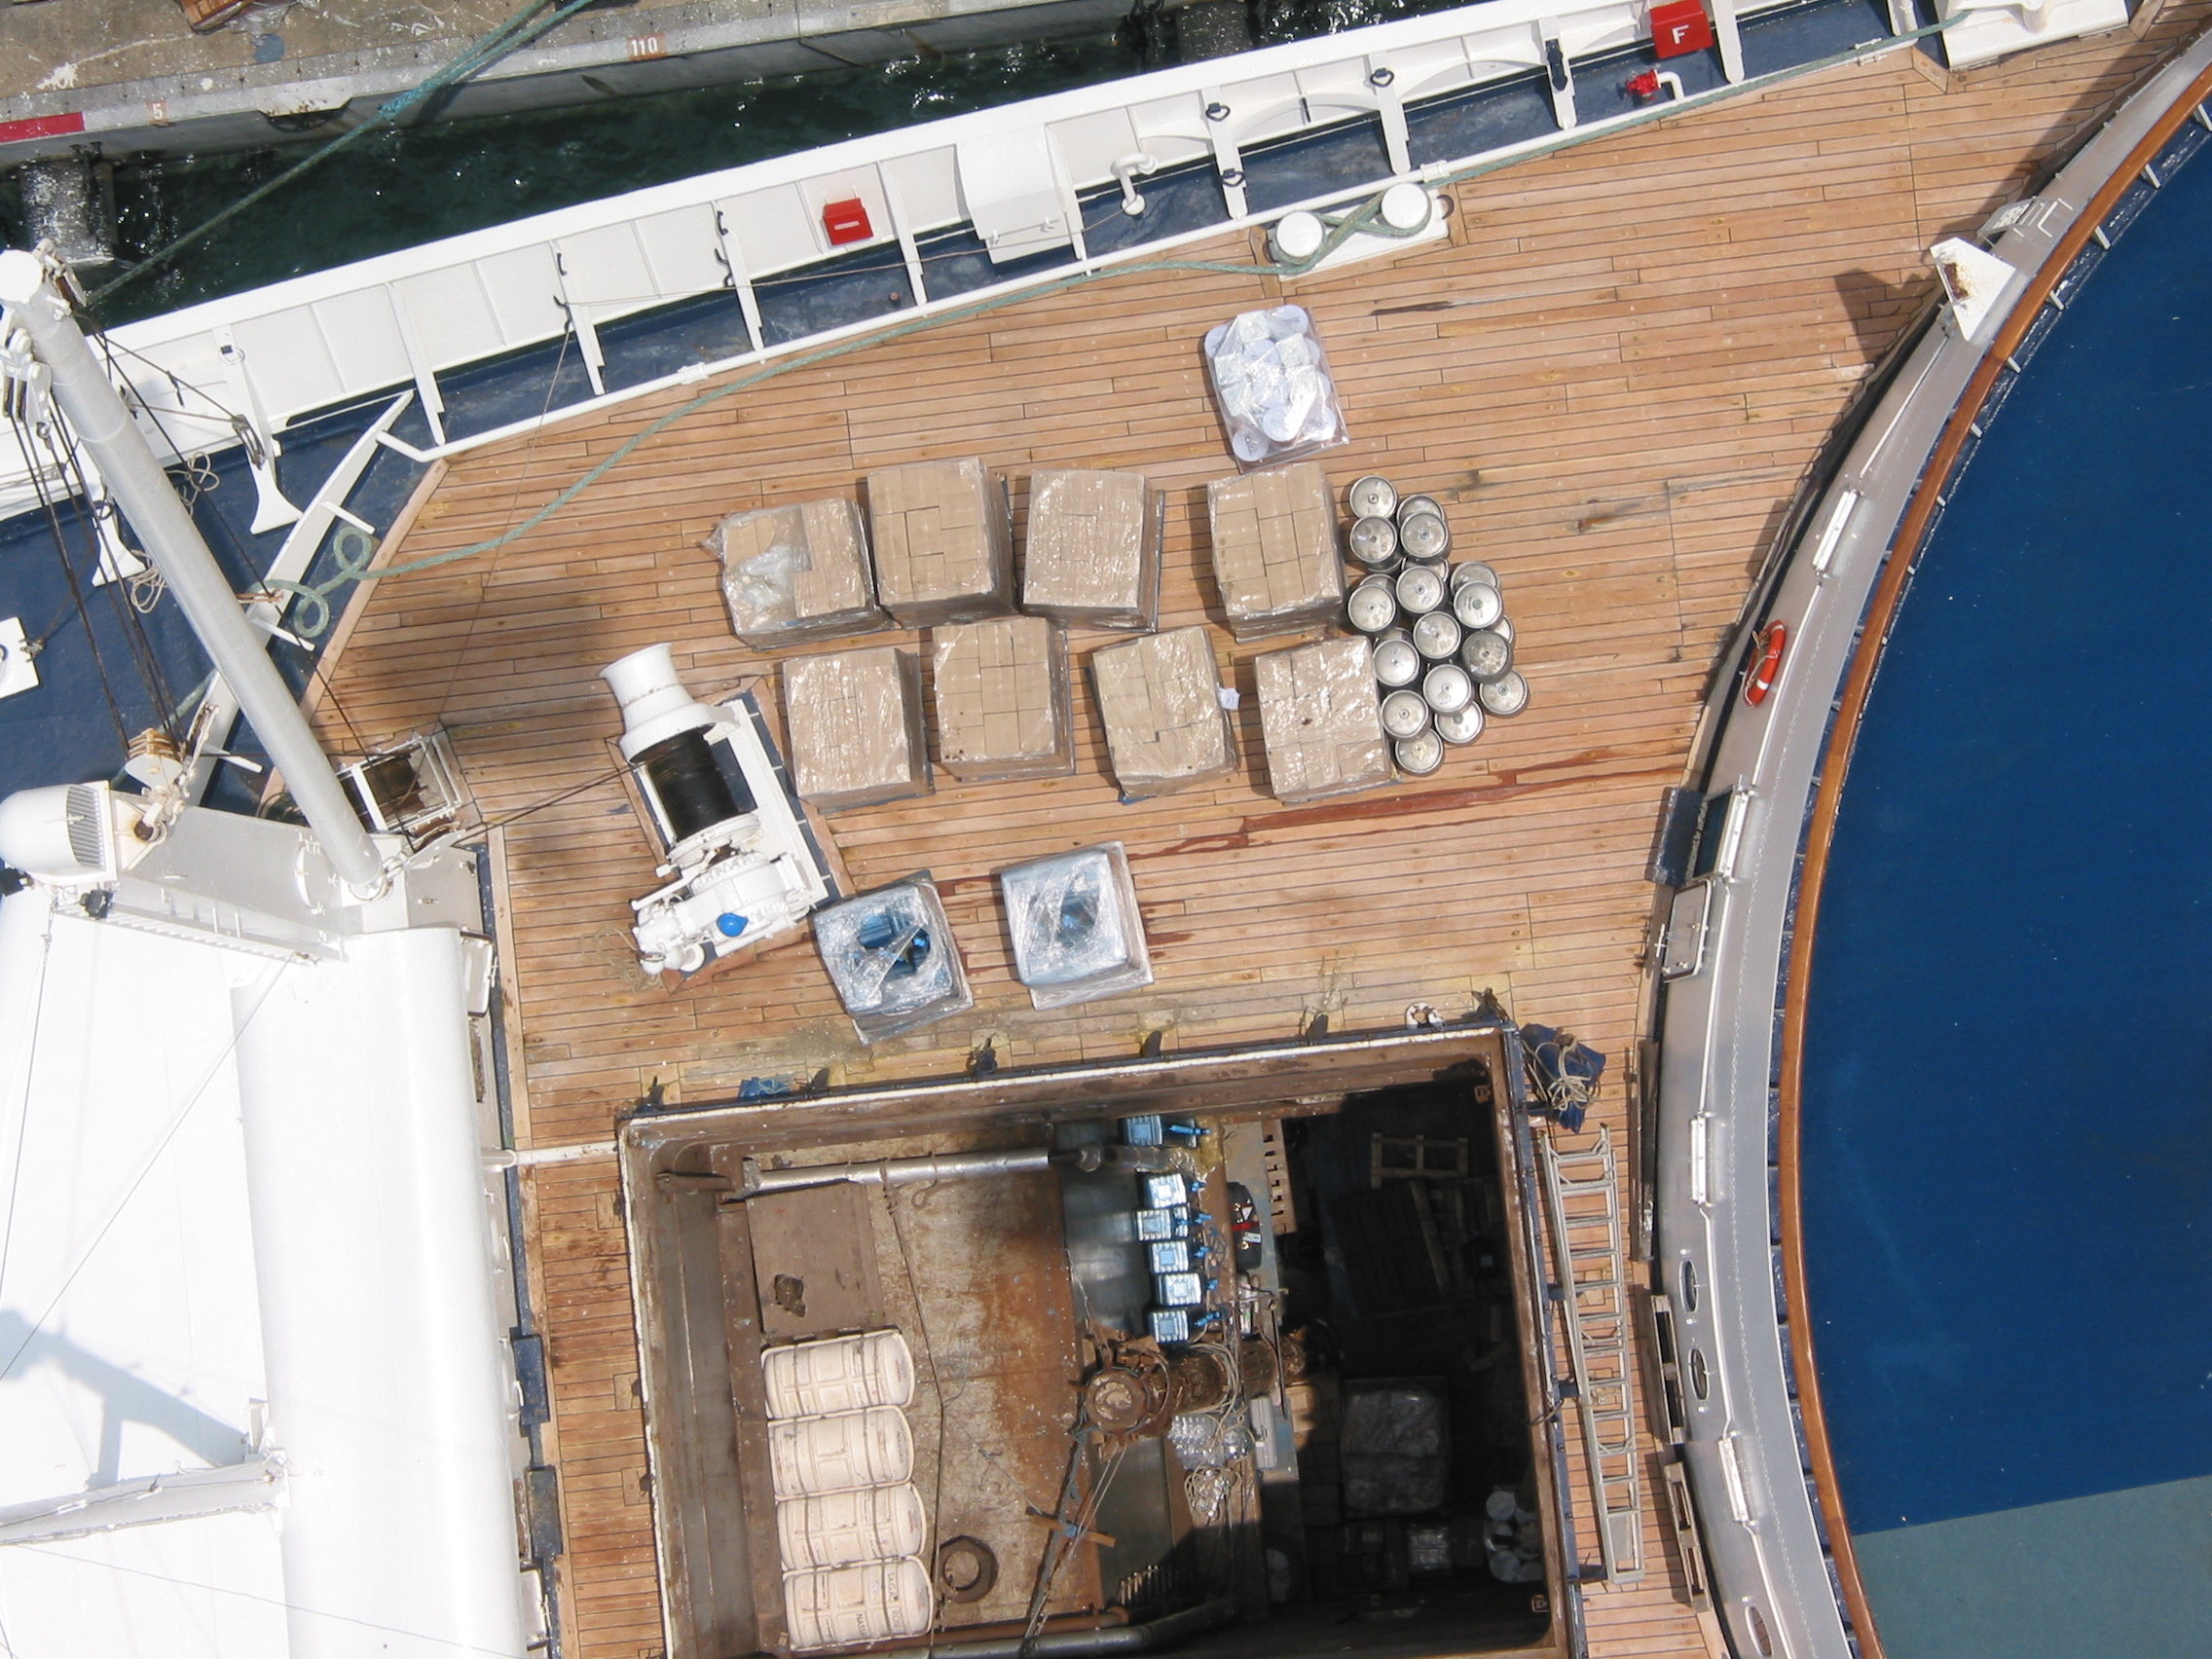 note the beer kegs on the deck of this boat